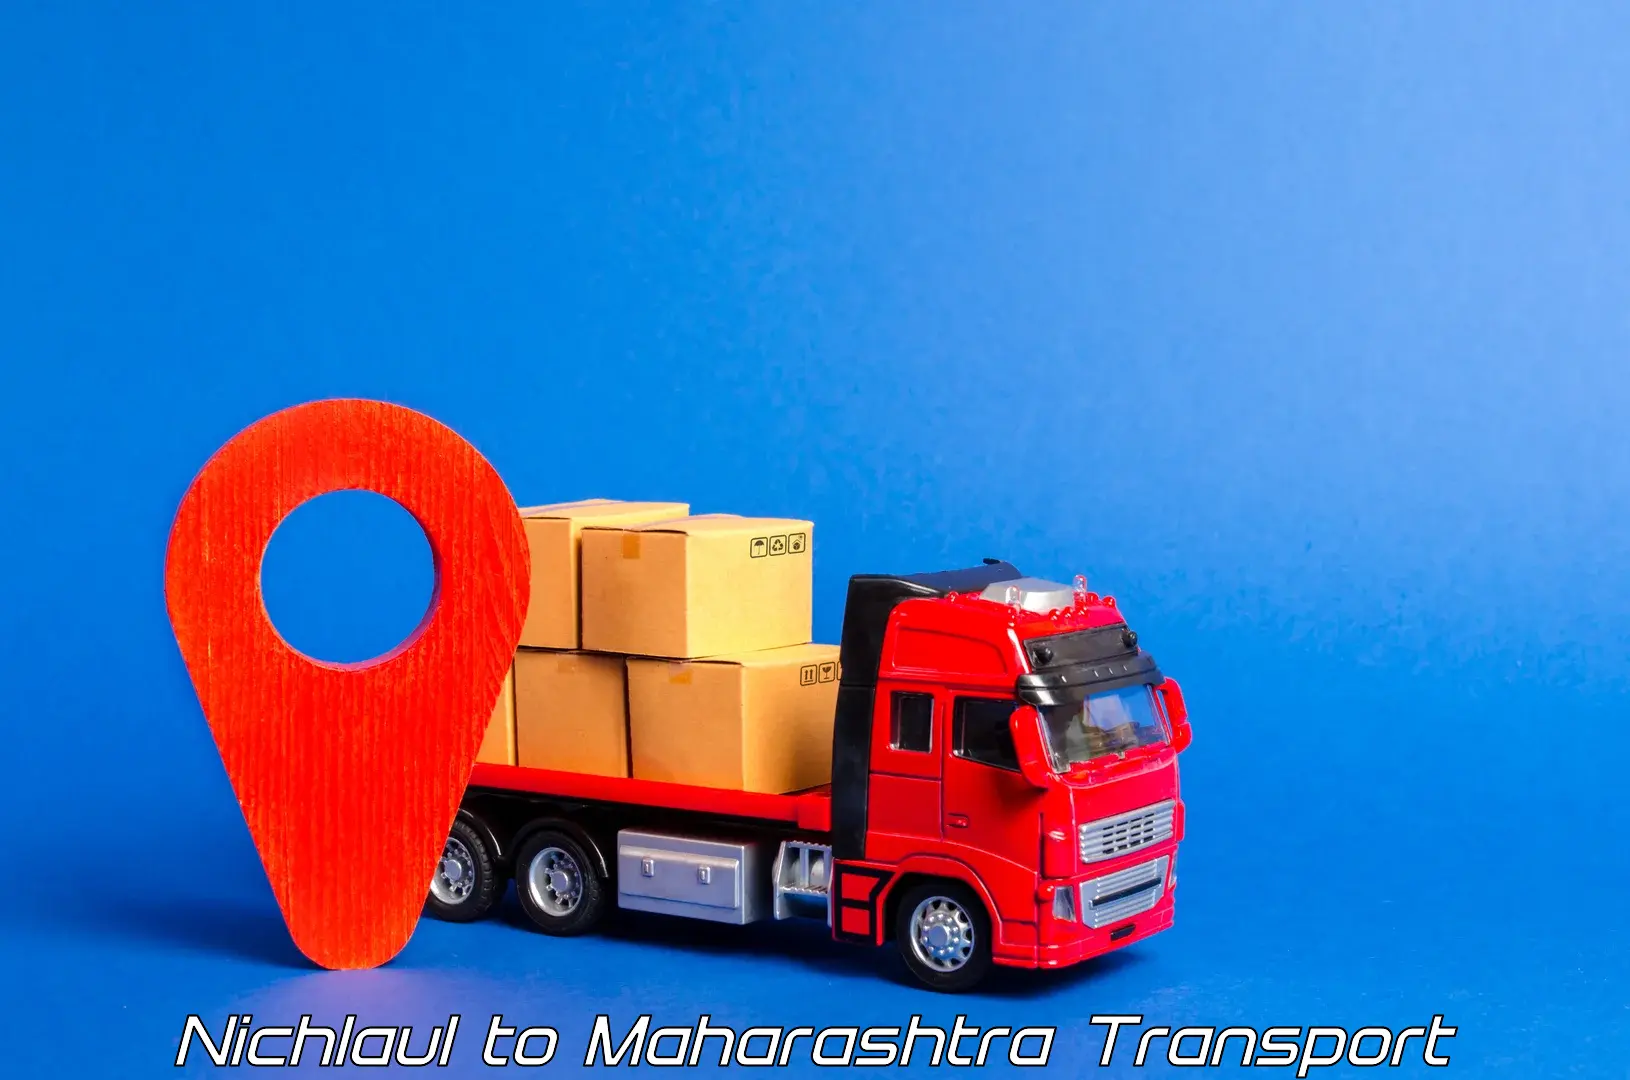 Nearby transport service Nichlaul to Tata Institute of Social Sciences Mumbai